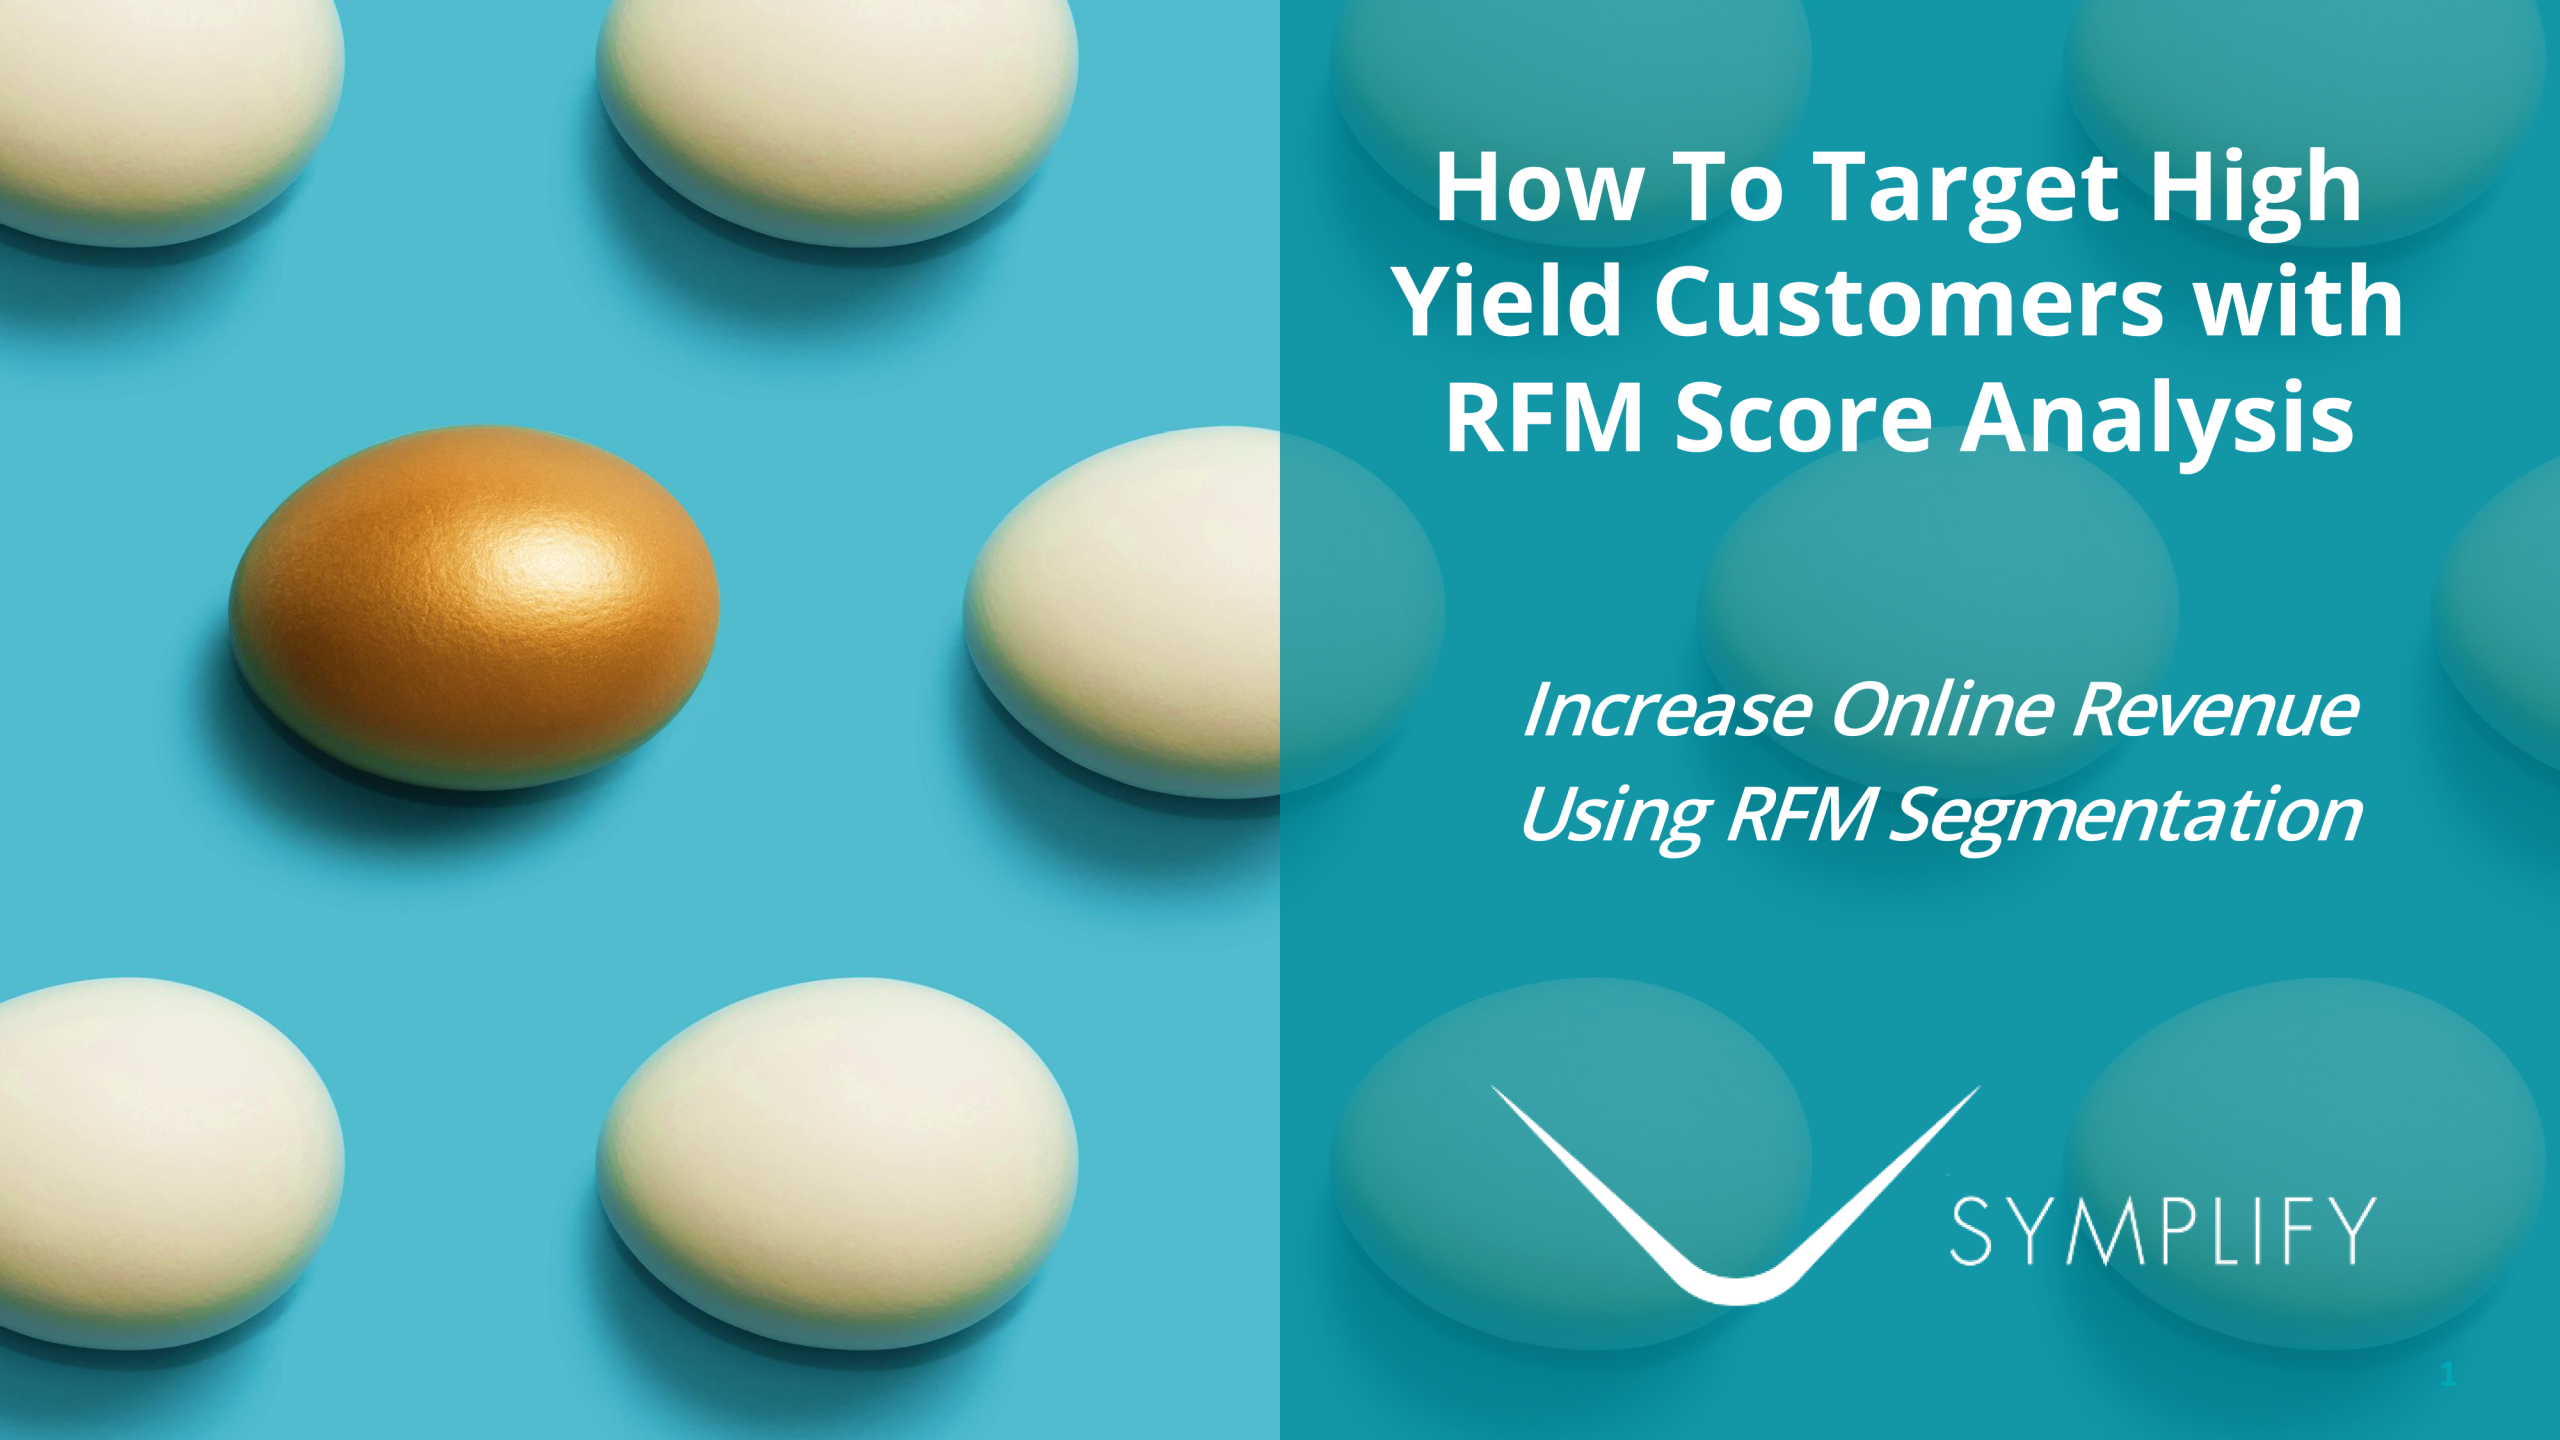 How To Target High Yield Customers with RFM Score Analysis